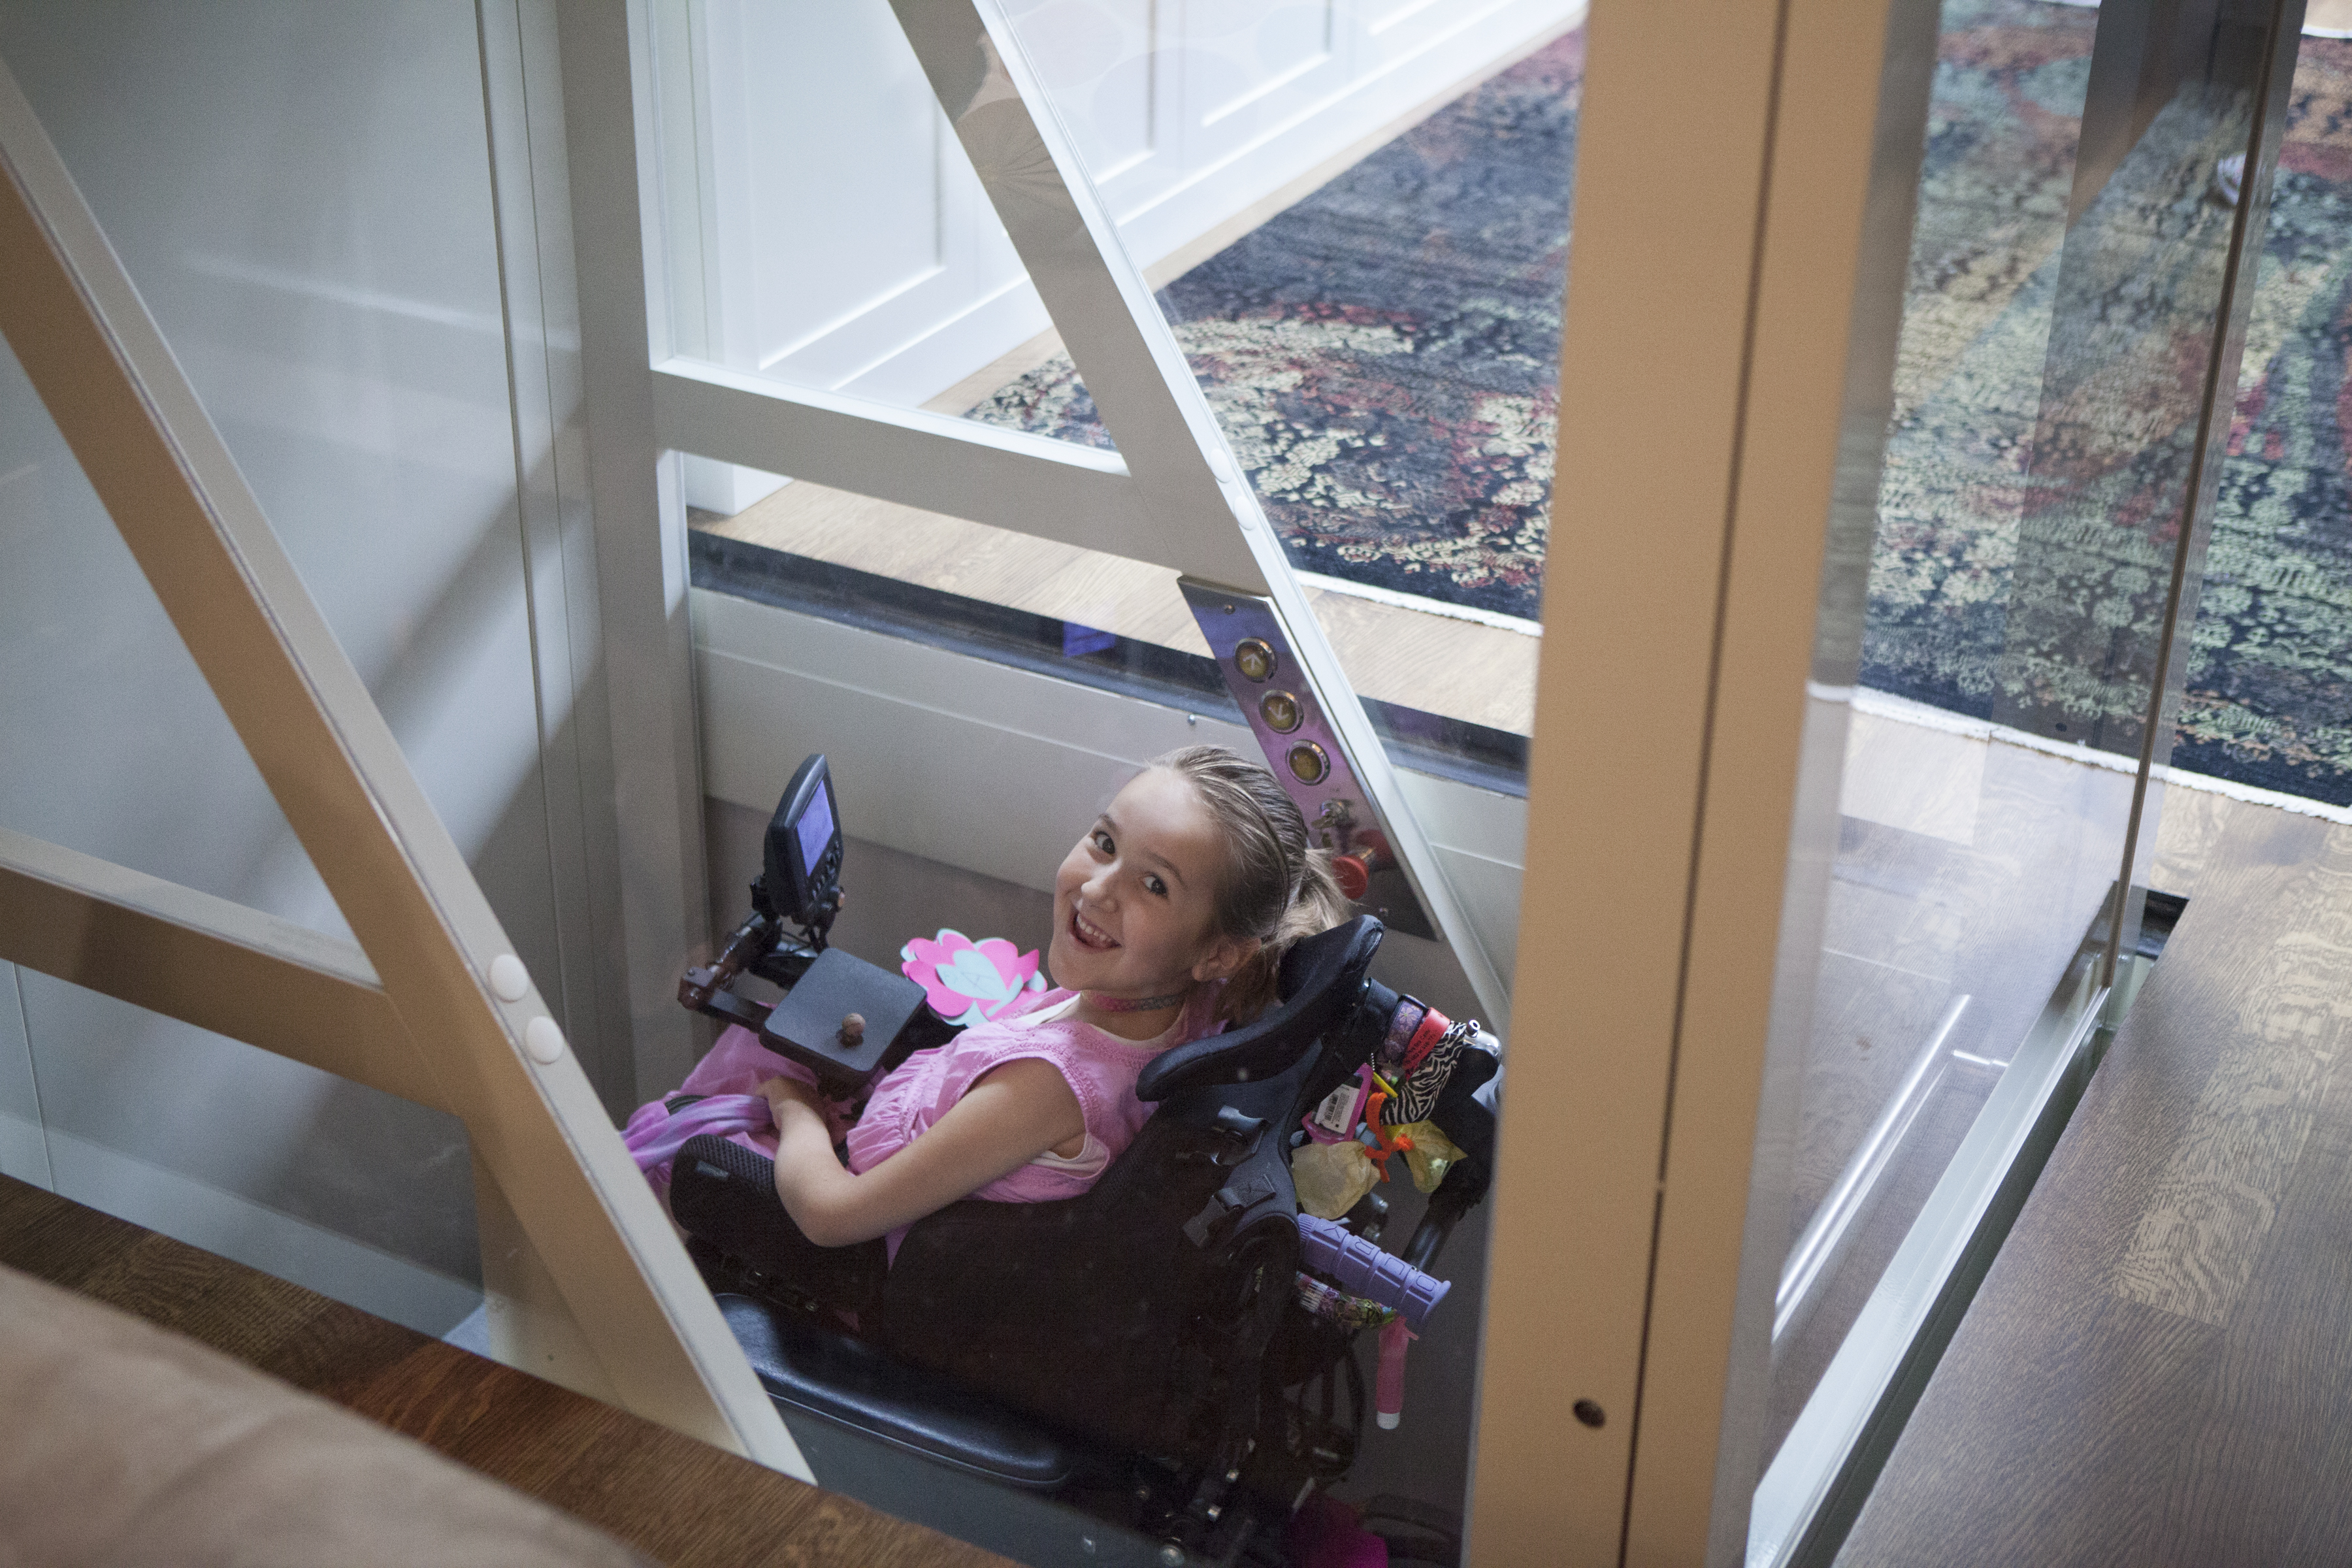 Asha Buliung, who is in a wheelchair, uses her home elevator